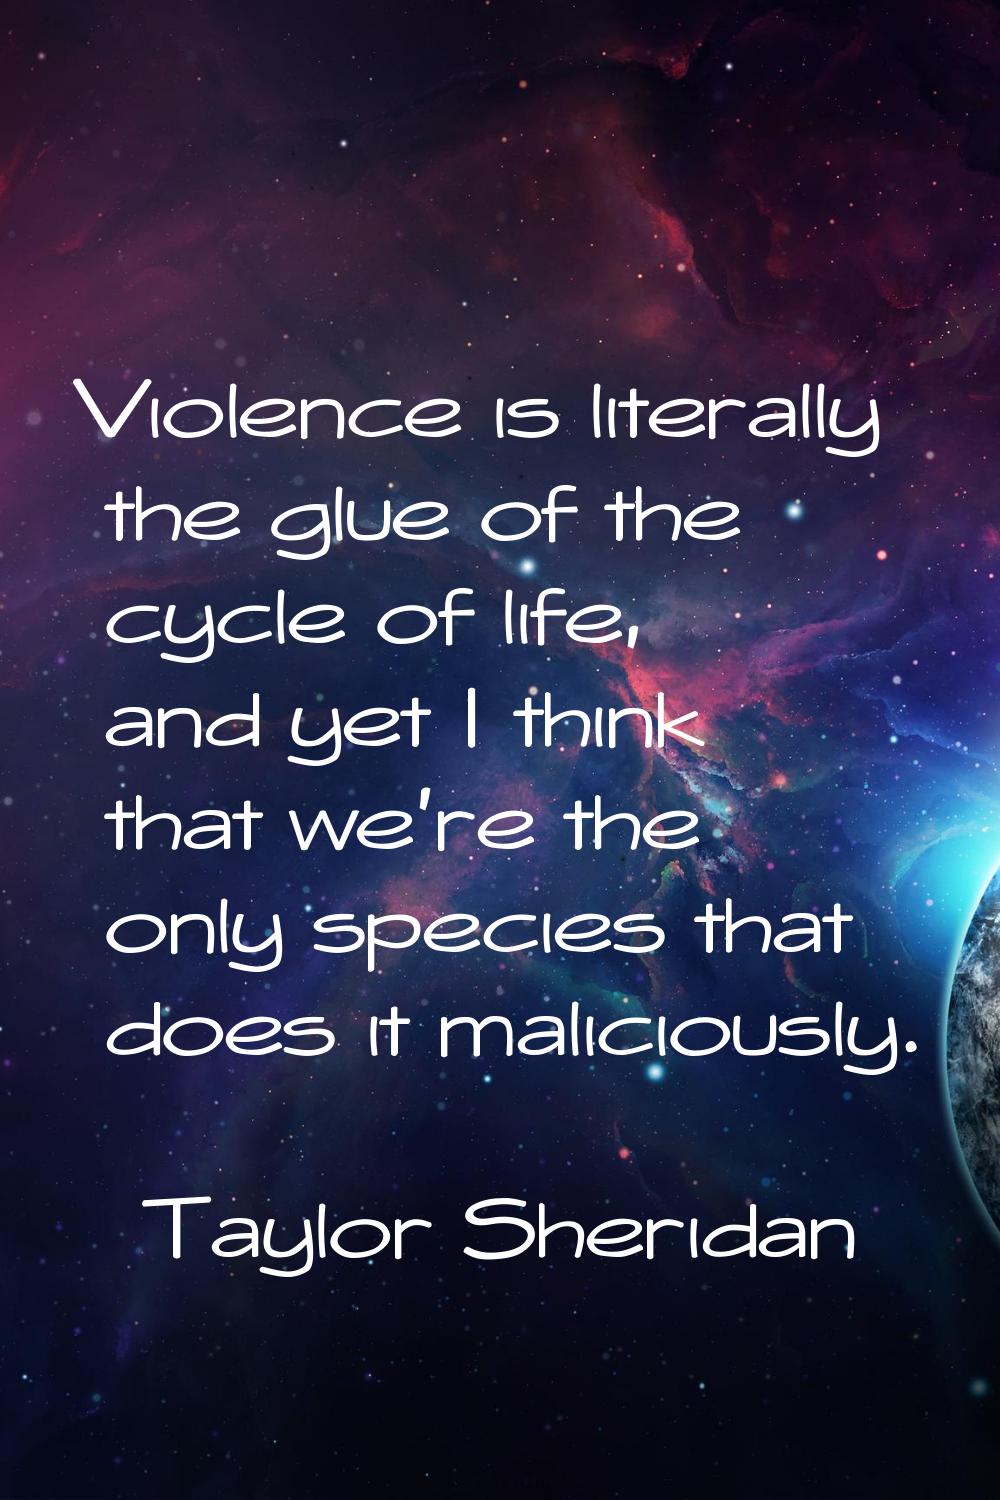 Violence is literally the glue of the cycle of life, and yet I think that we're the only species th